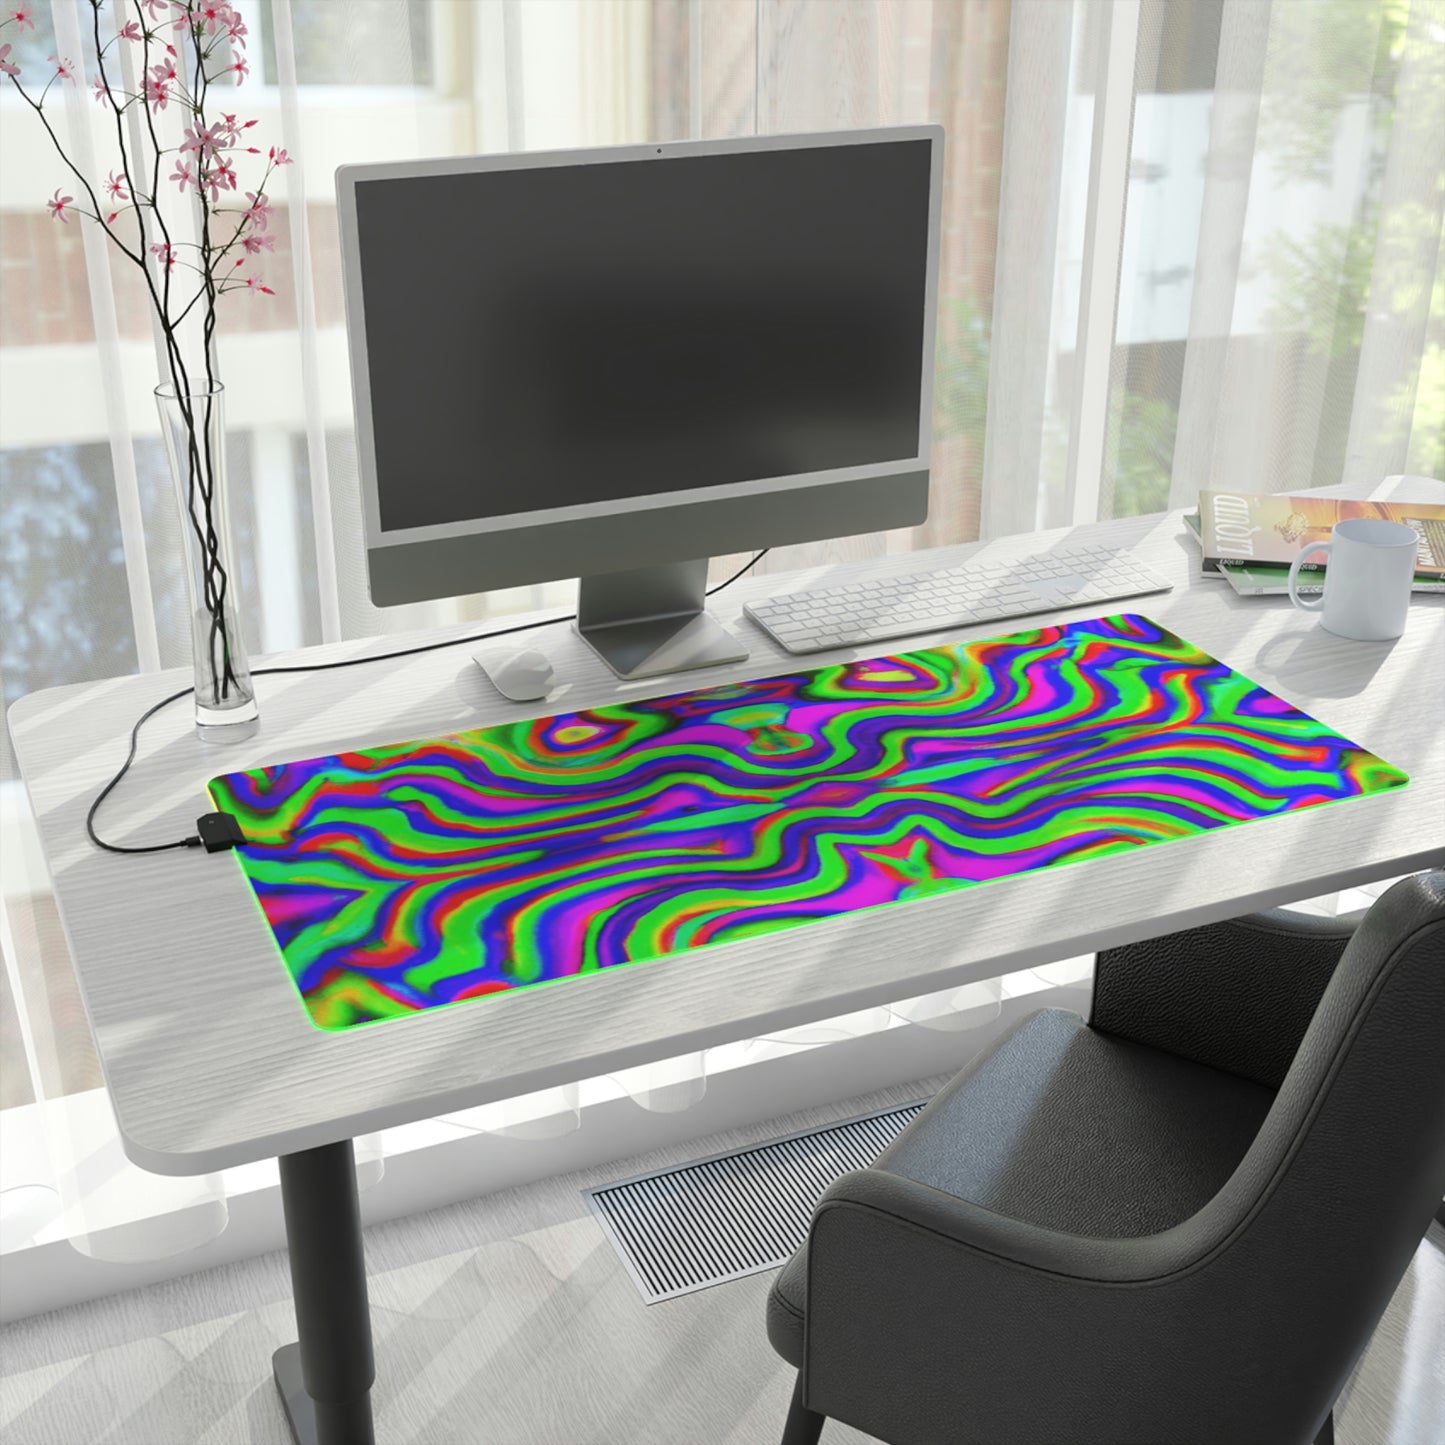 Levi Sparkplug - Psychedelic Trippy LED Light Up Gaming Mouse Pad